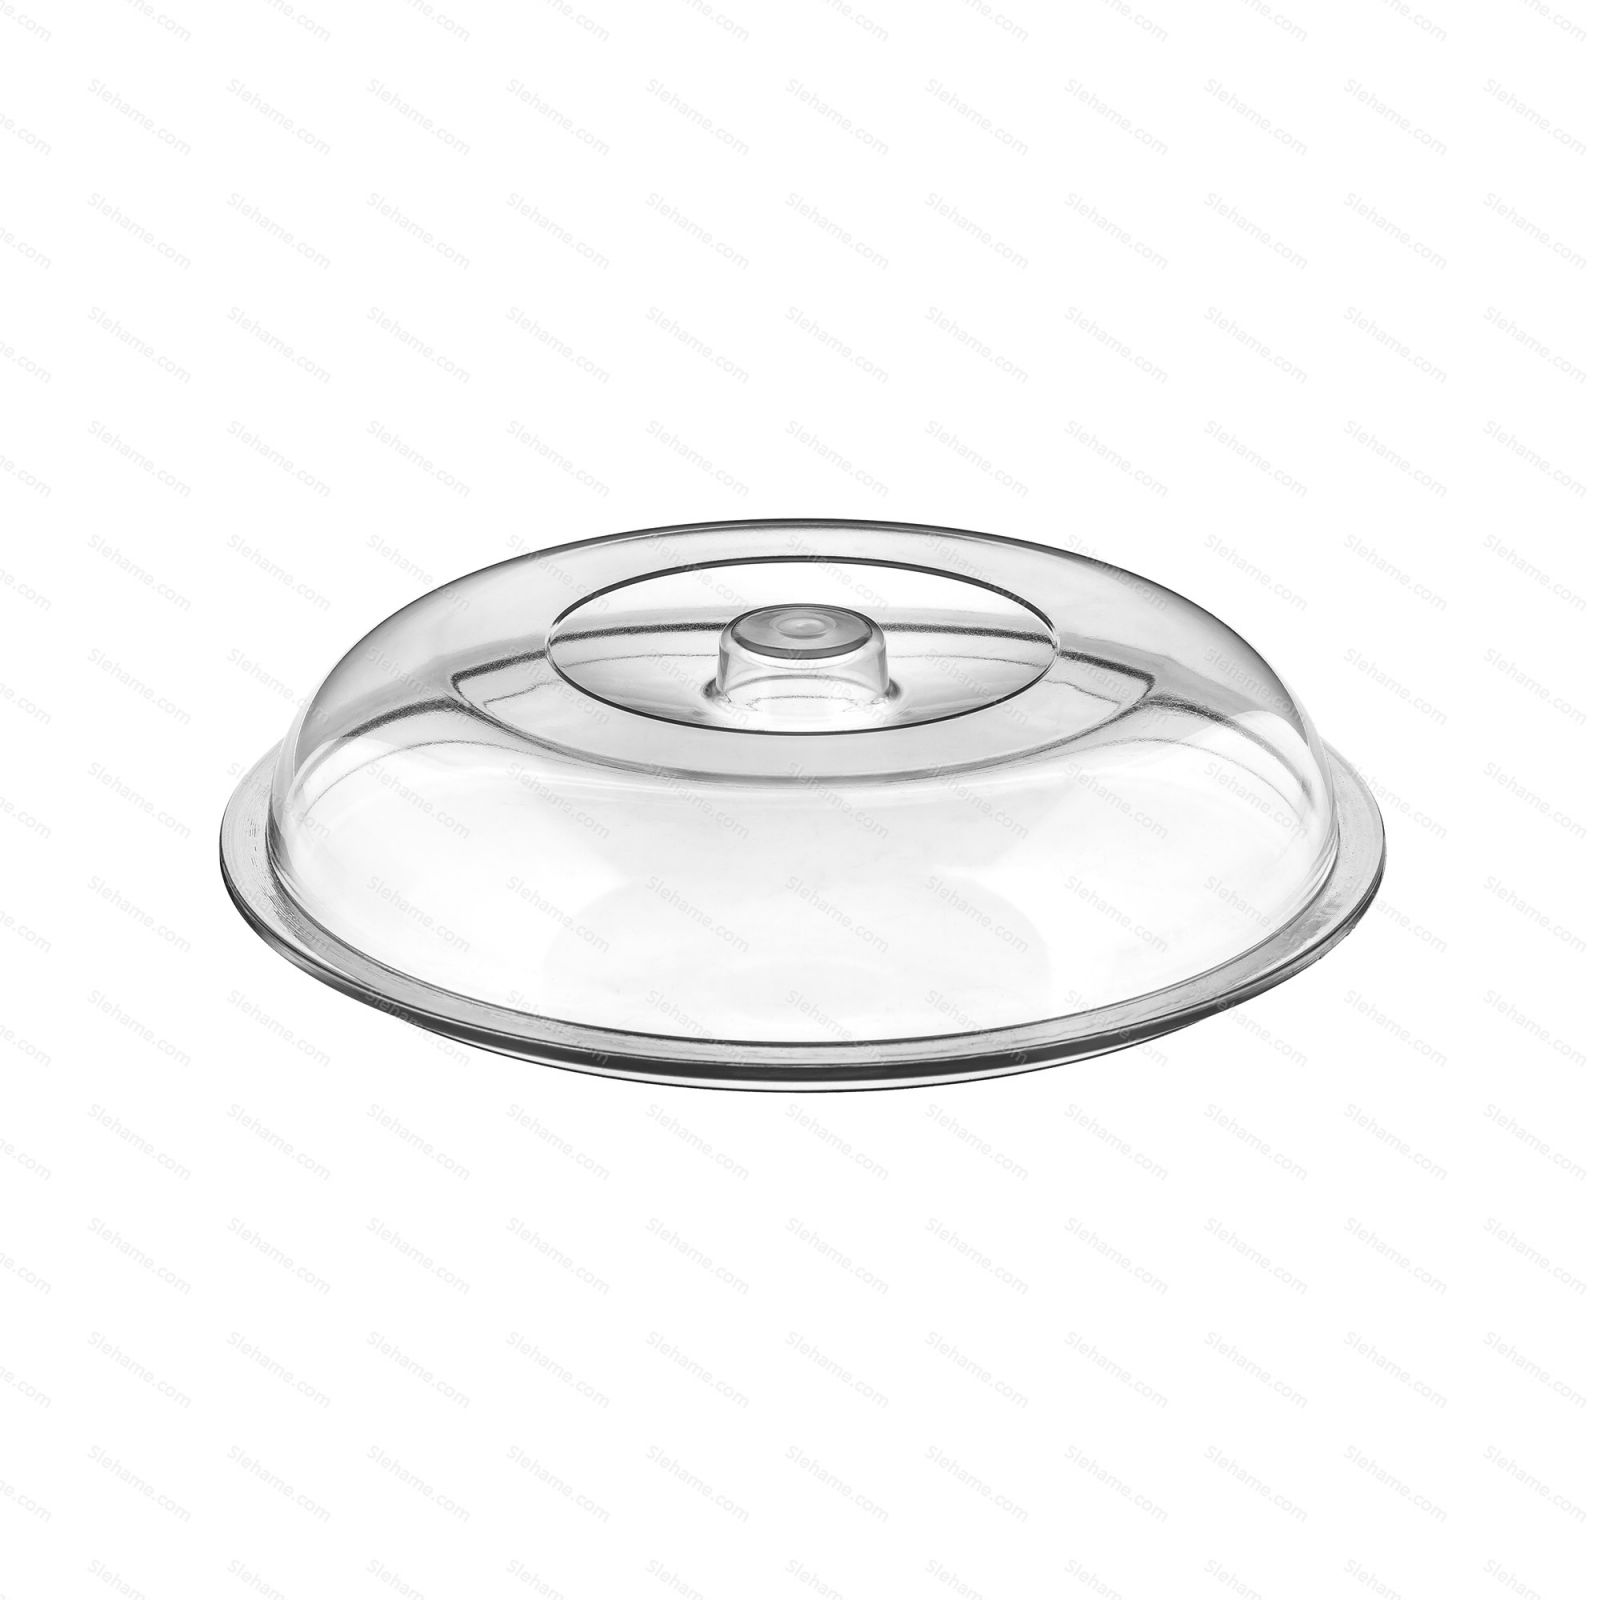 Top lid Musso, small